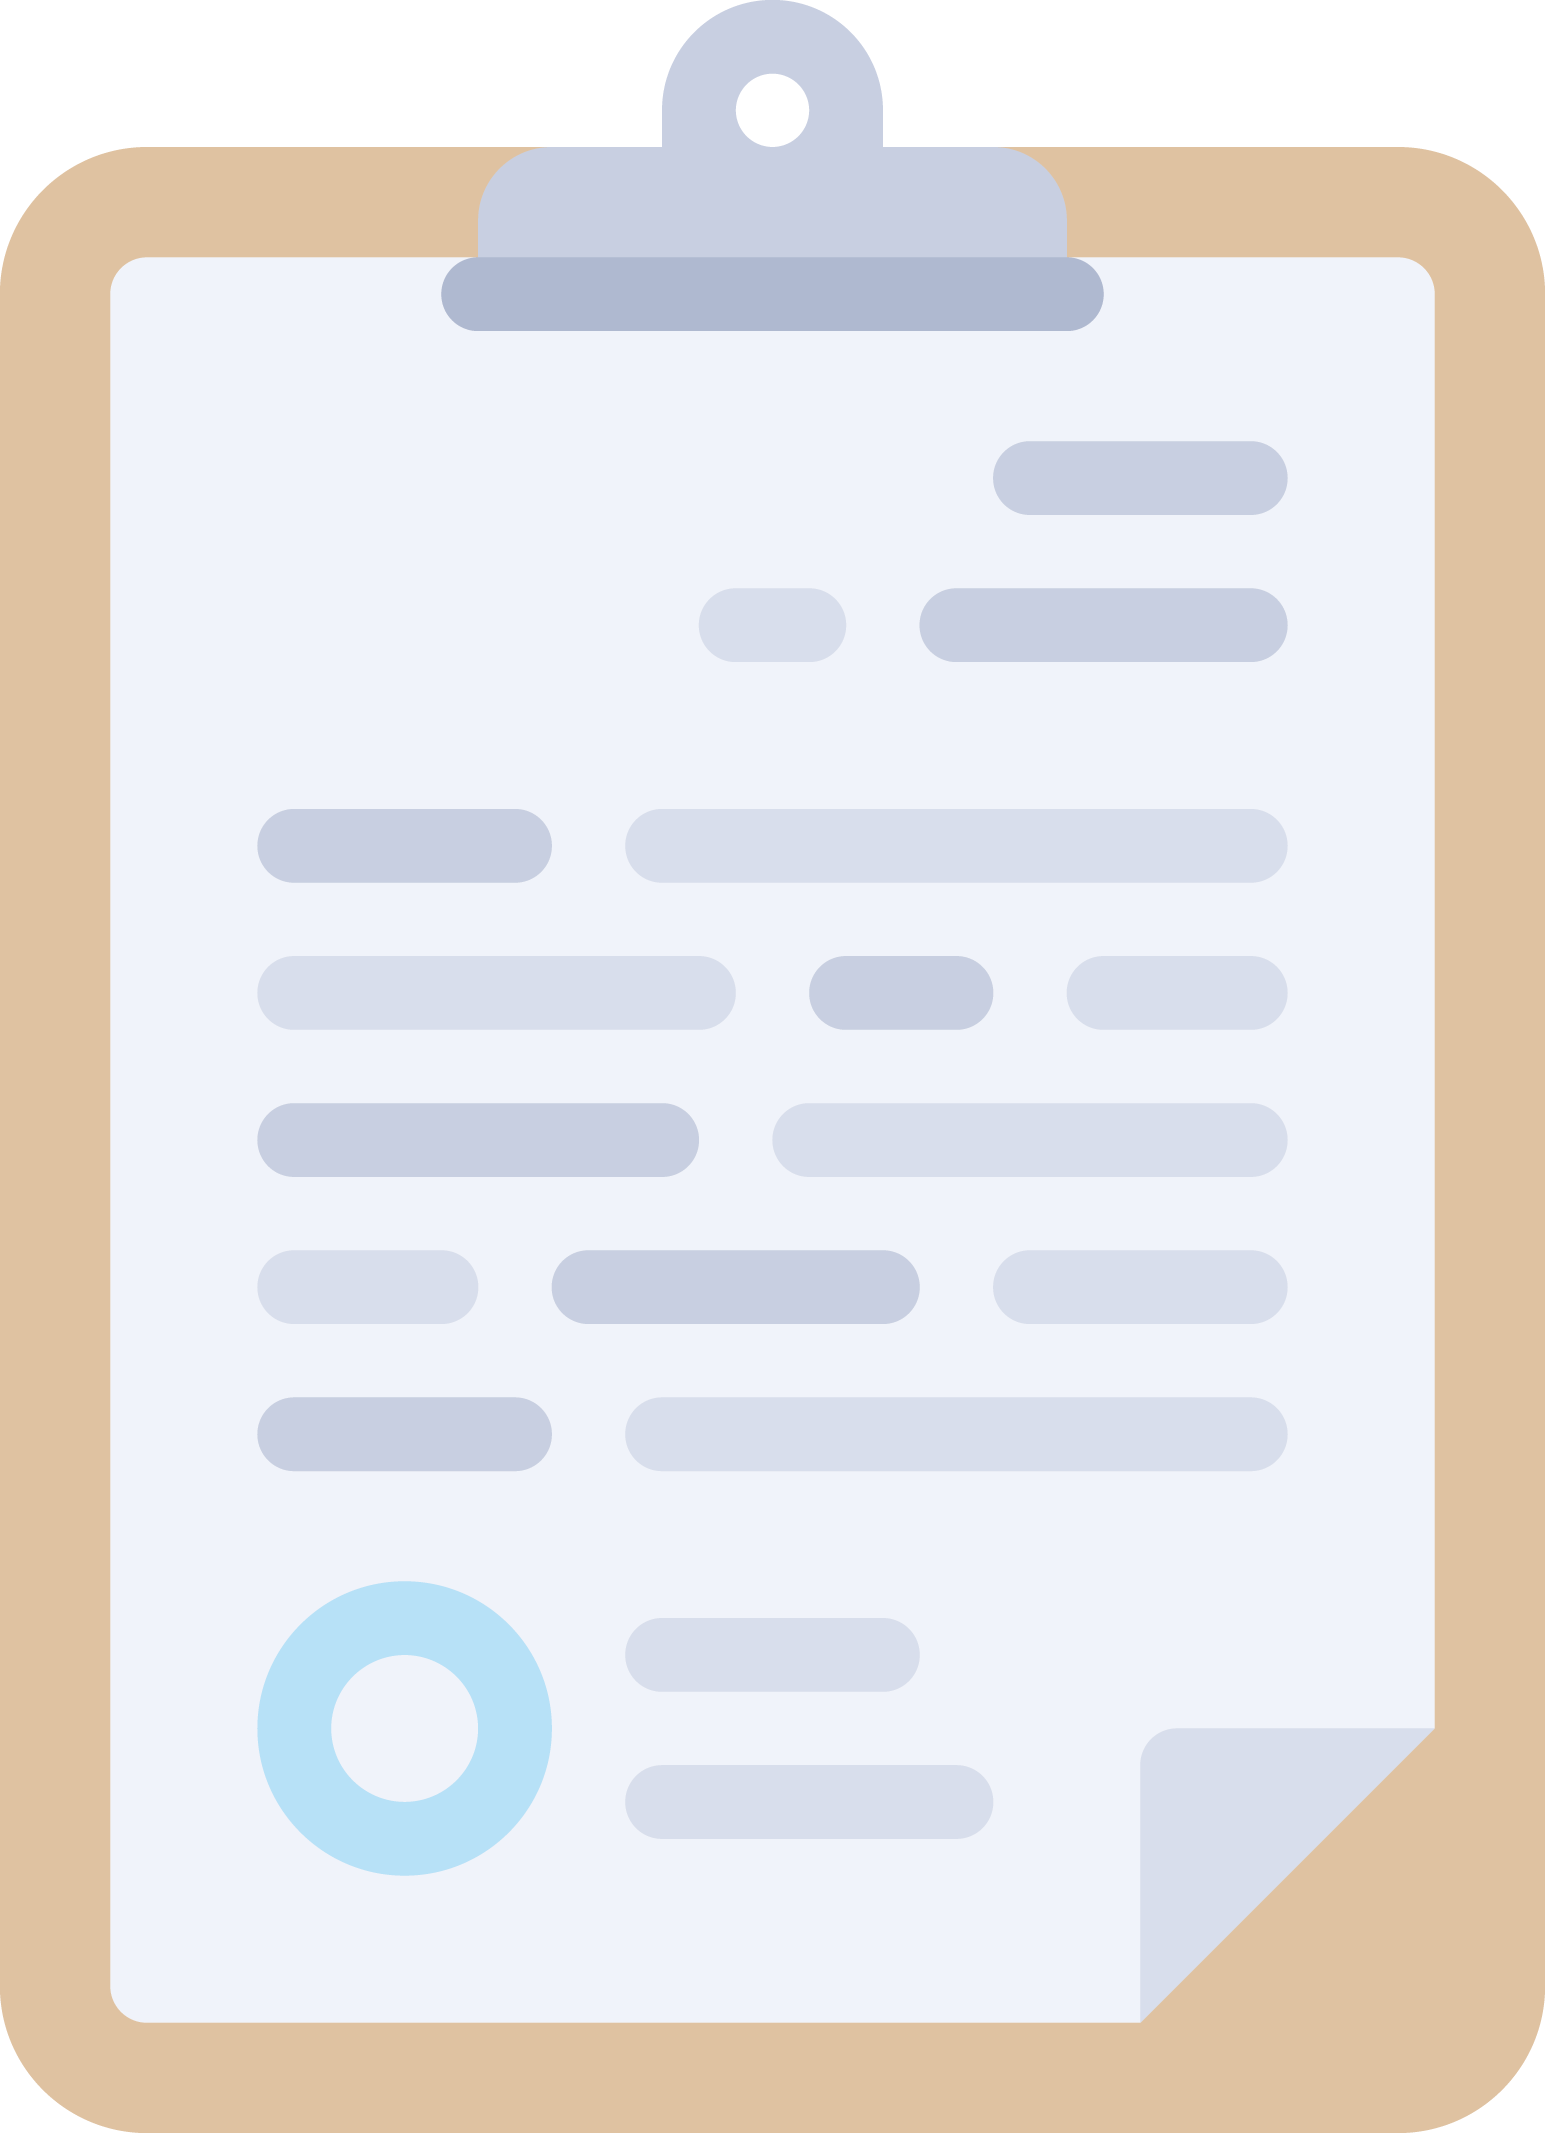 004-contract.png